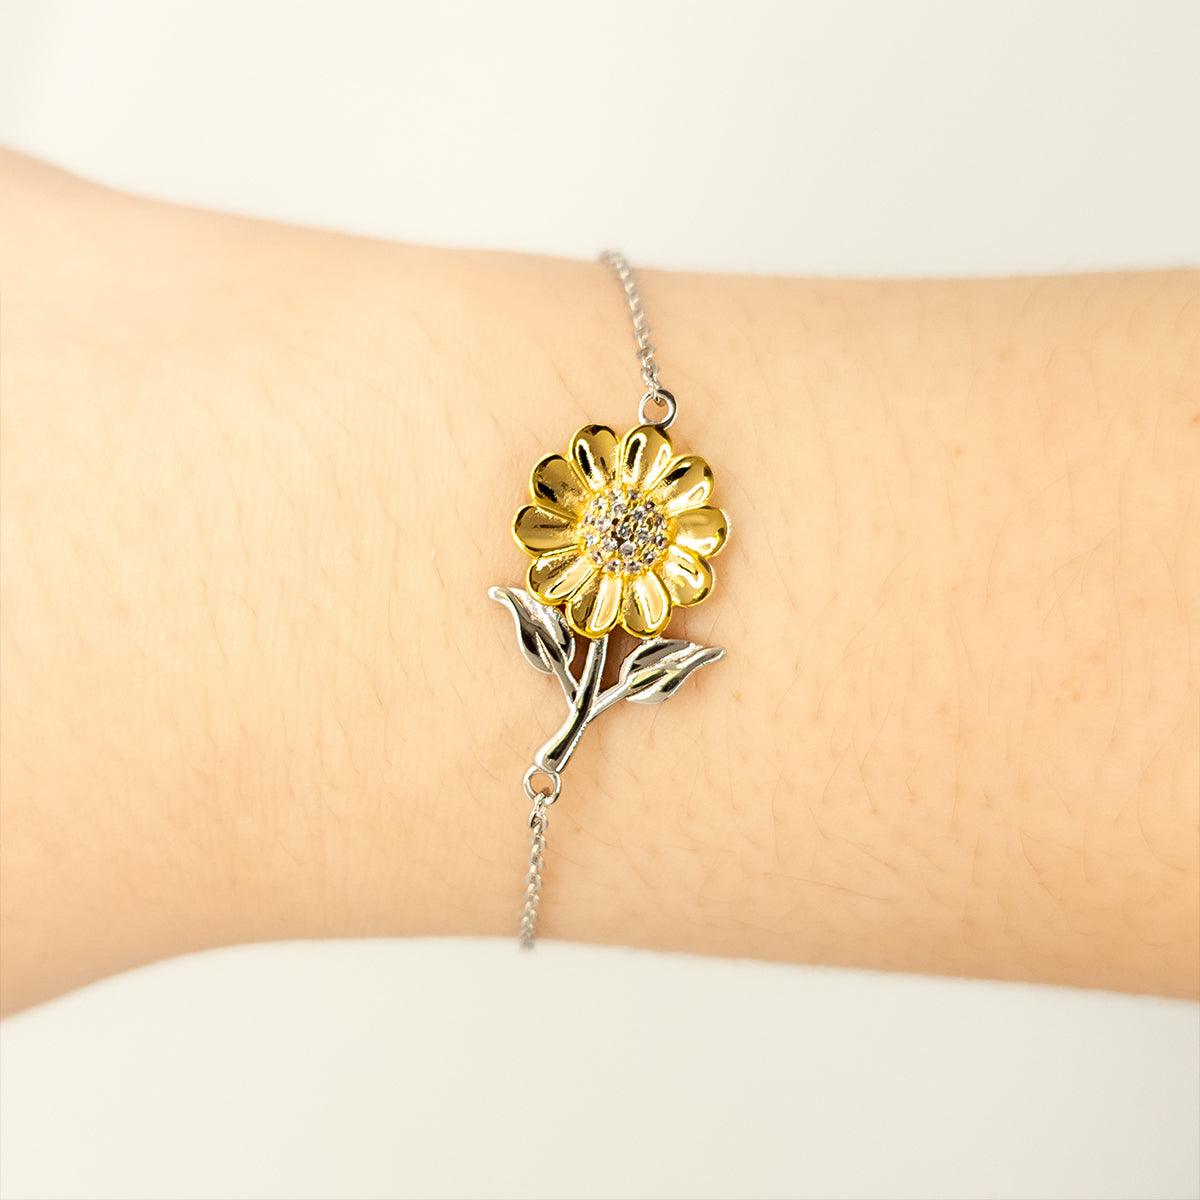 Remarkable Law Enforcement Officer Gifts, Your dedication and hard work, Inspirational Birthday Christmas Unique Sunflower Bracelet For Law Enforcement Officer, Coworkers, Men, Women, Friends - Mallard Moon Gift Shop